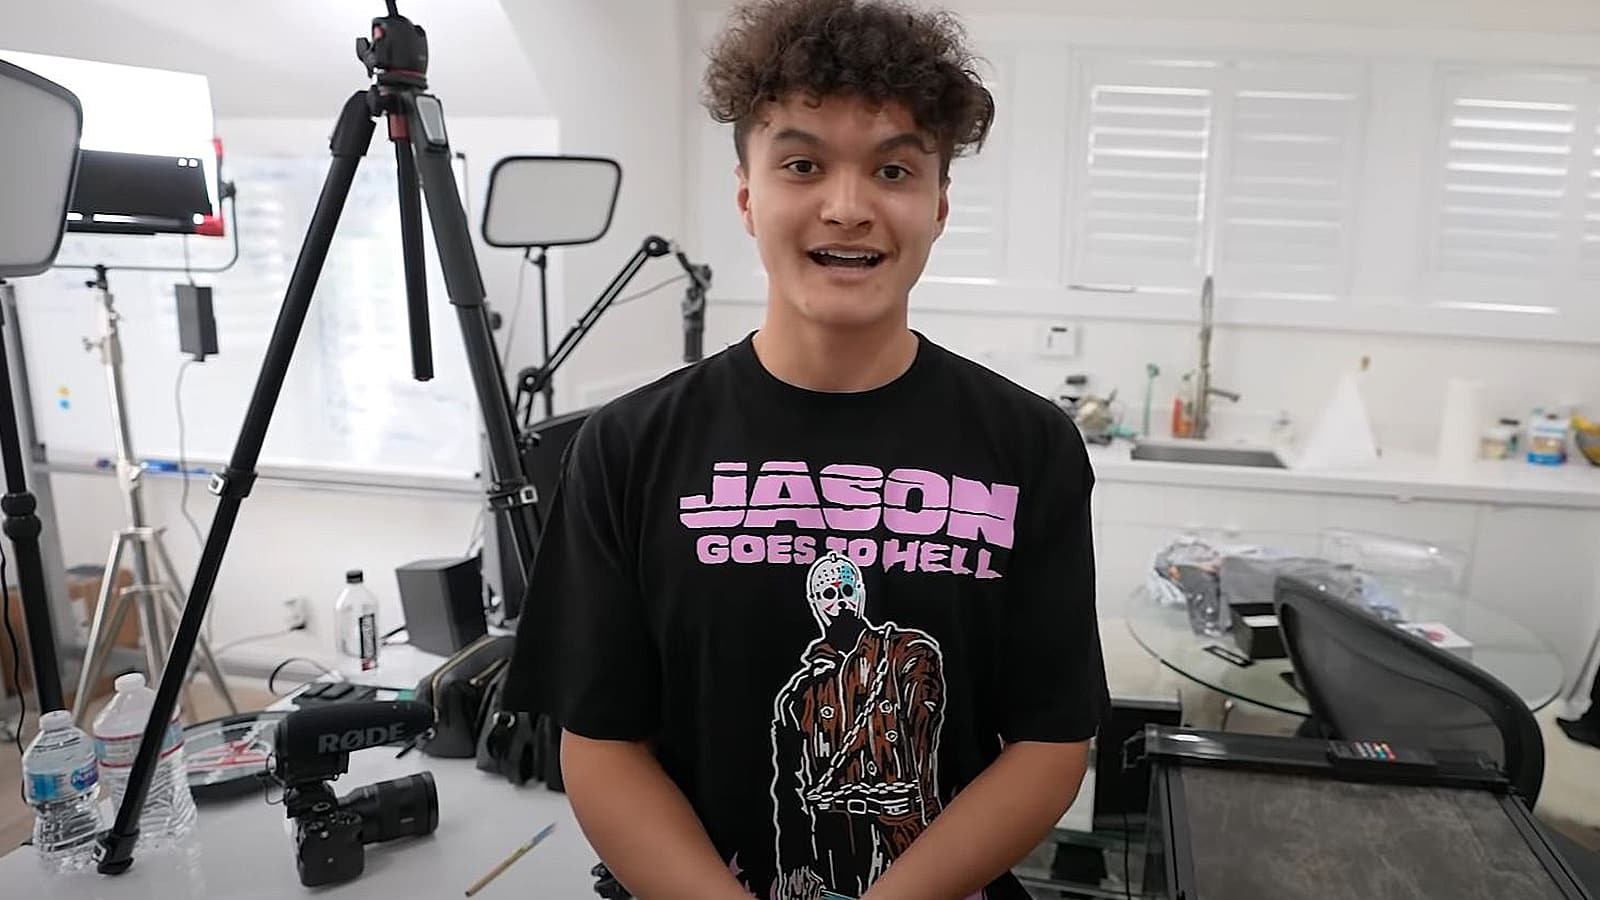 FaZe Jarvis speaks to the camera wearing a shirt with Jason Vorhees on it.